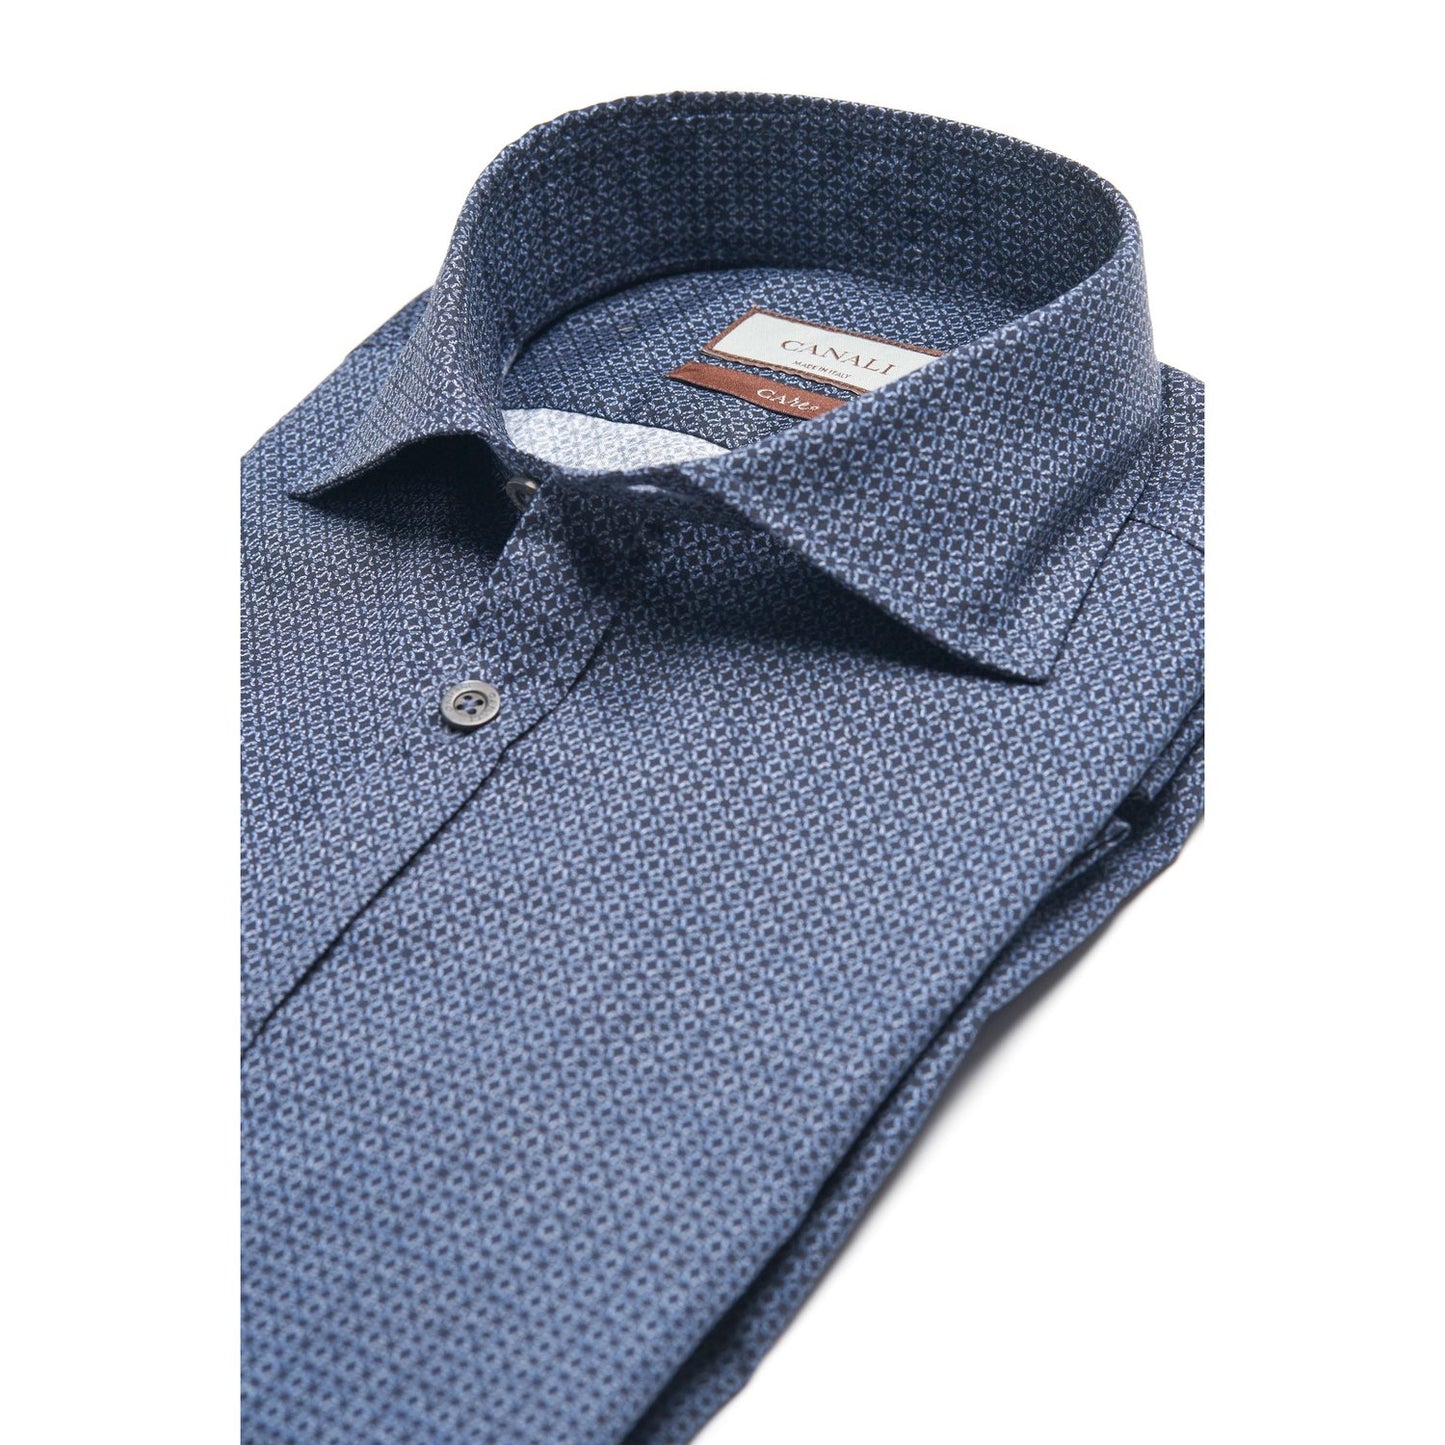 Canali Sport Shirt in Blue and White Cotton